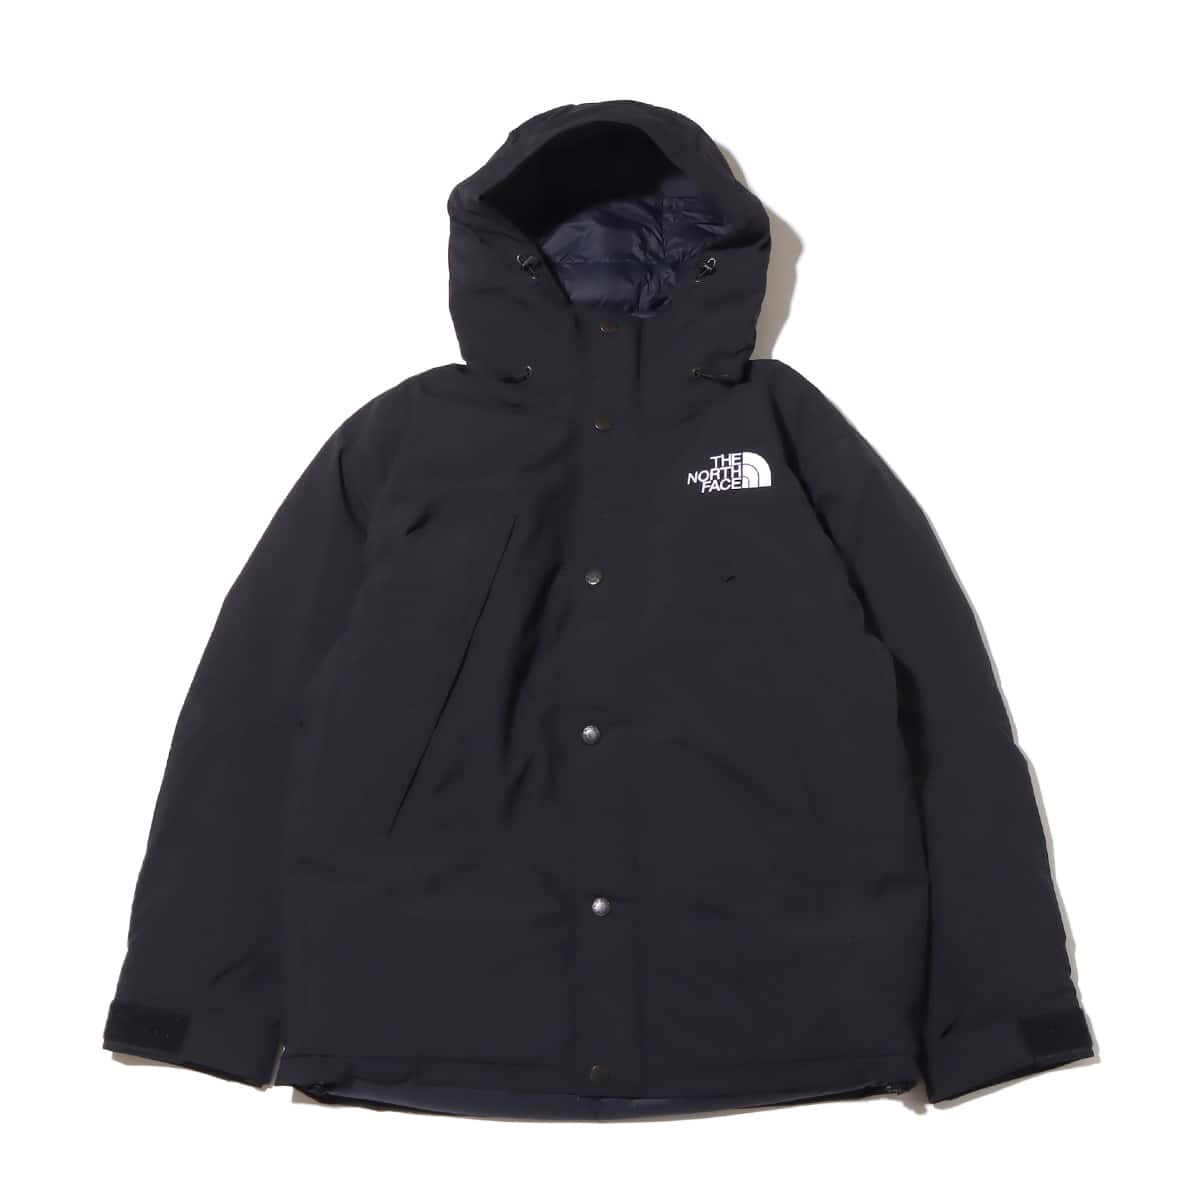 THE NORTH FACE MOUNTAIN DOWN COAT  BLACK希望金額教えて頂けますか